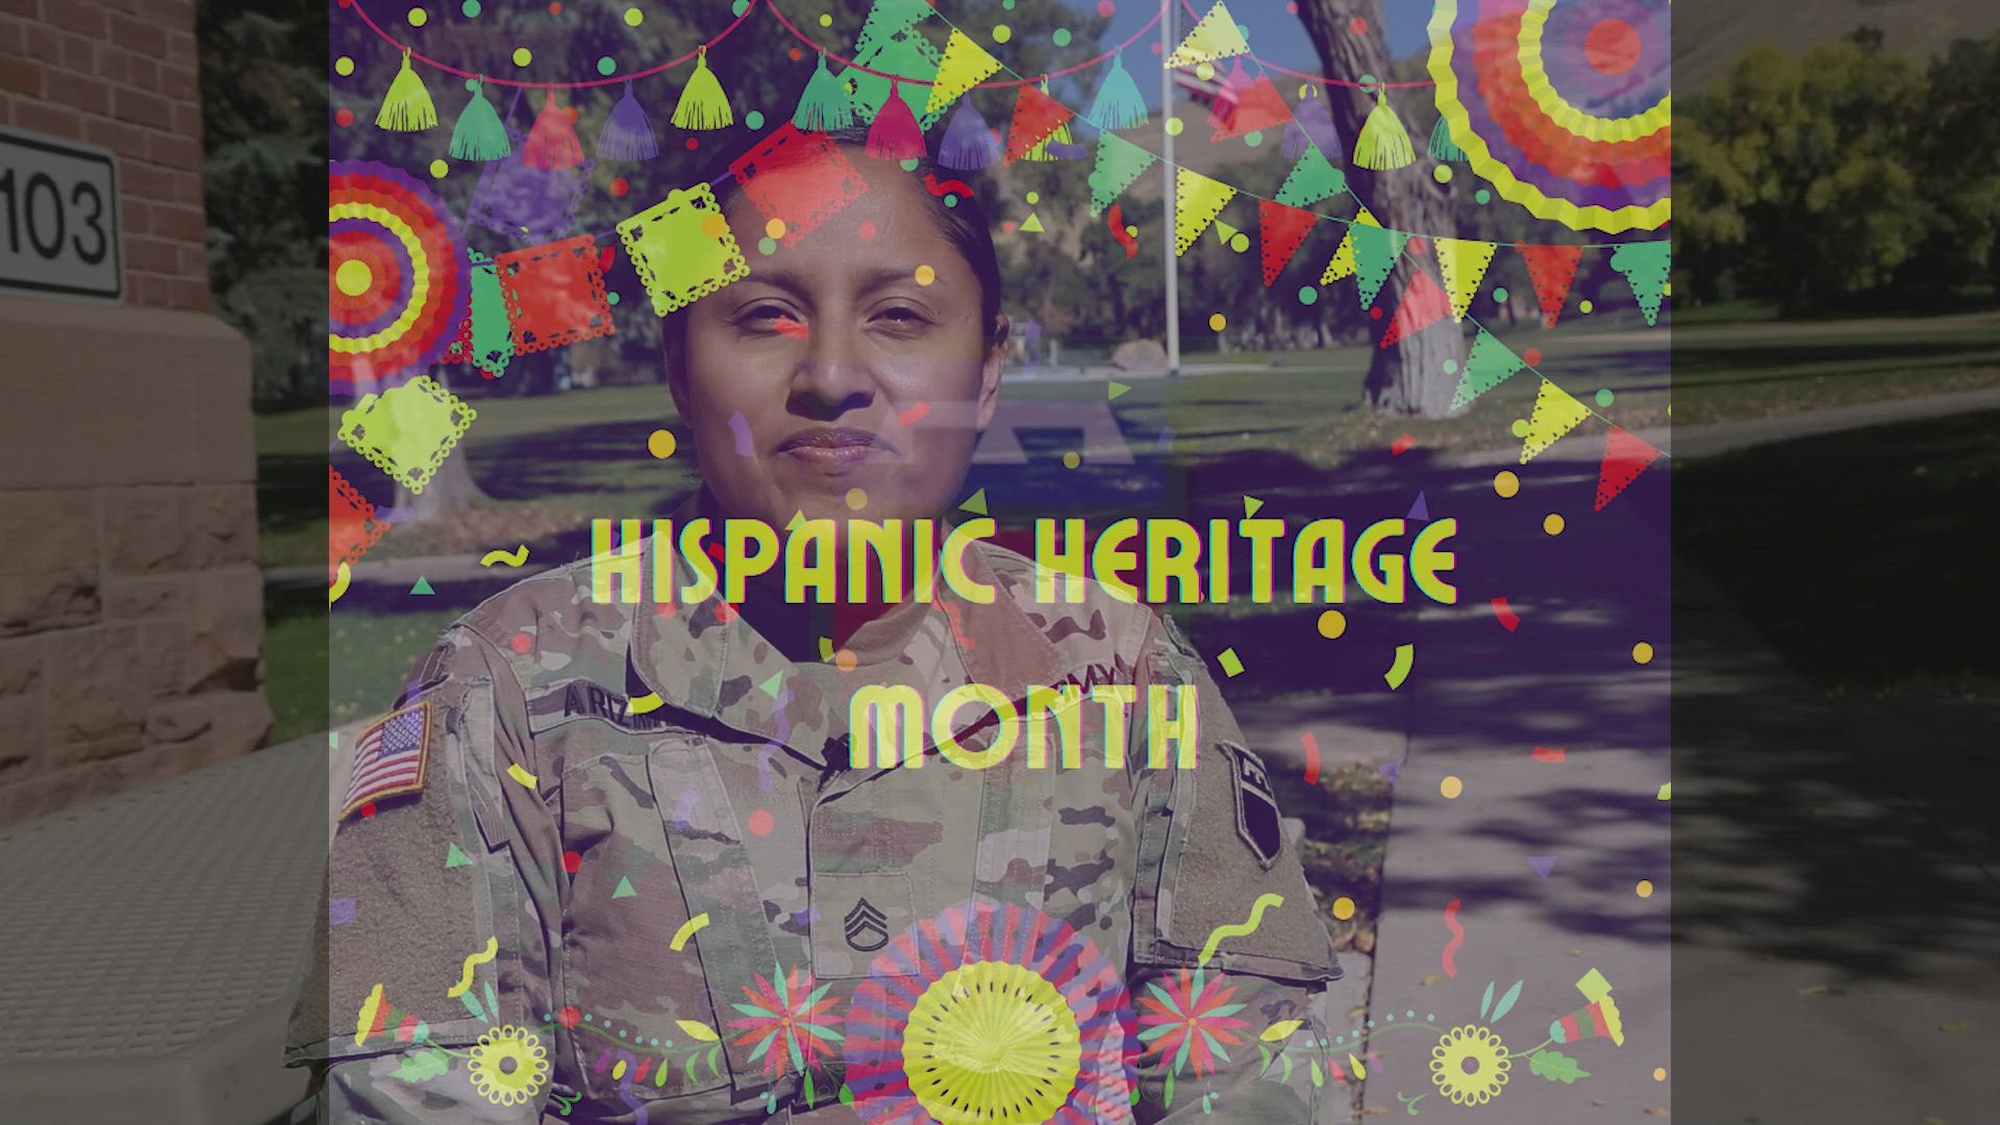 Graphic with Hispanic decorations overlies an image of a soldier in uniform standing outdoors.